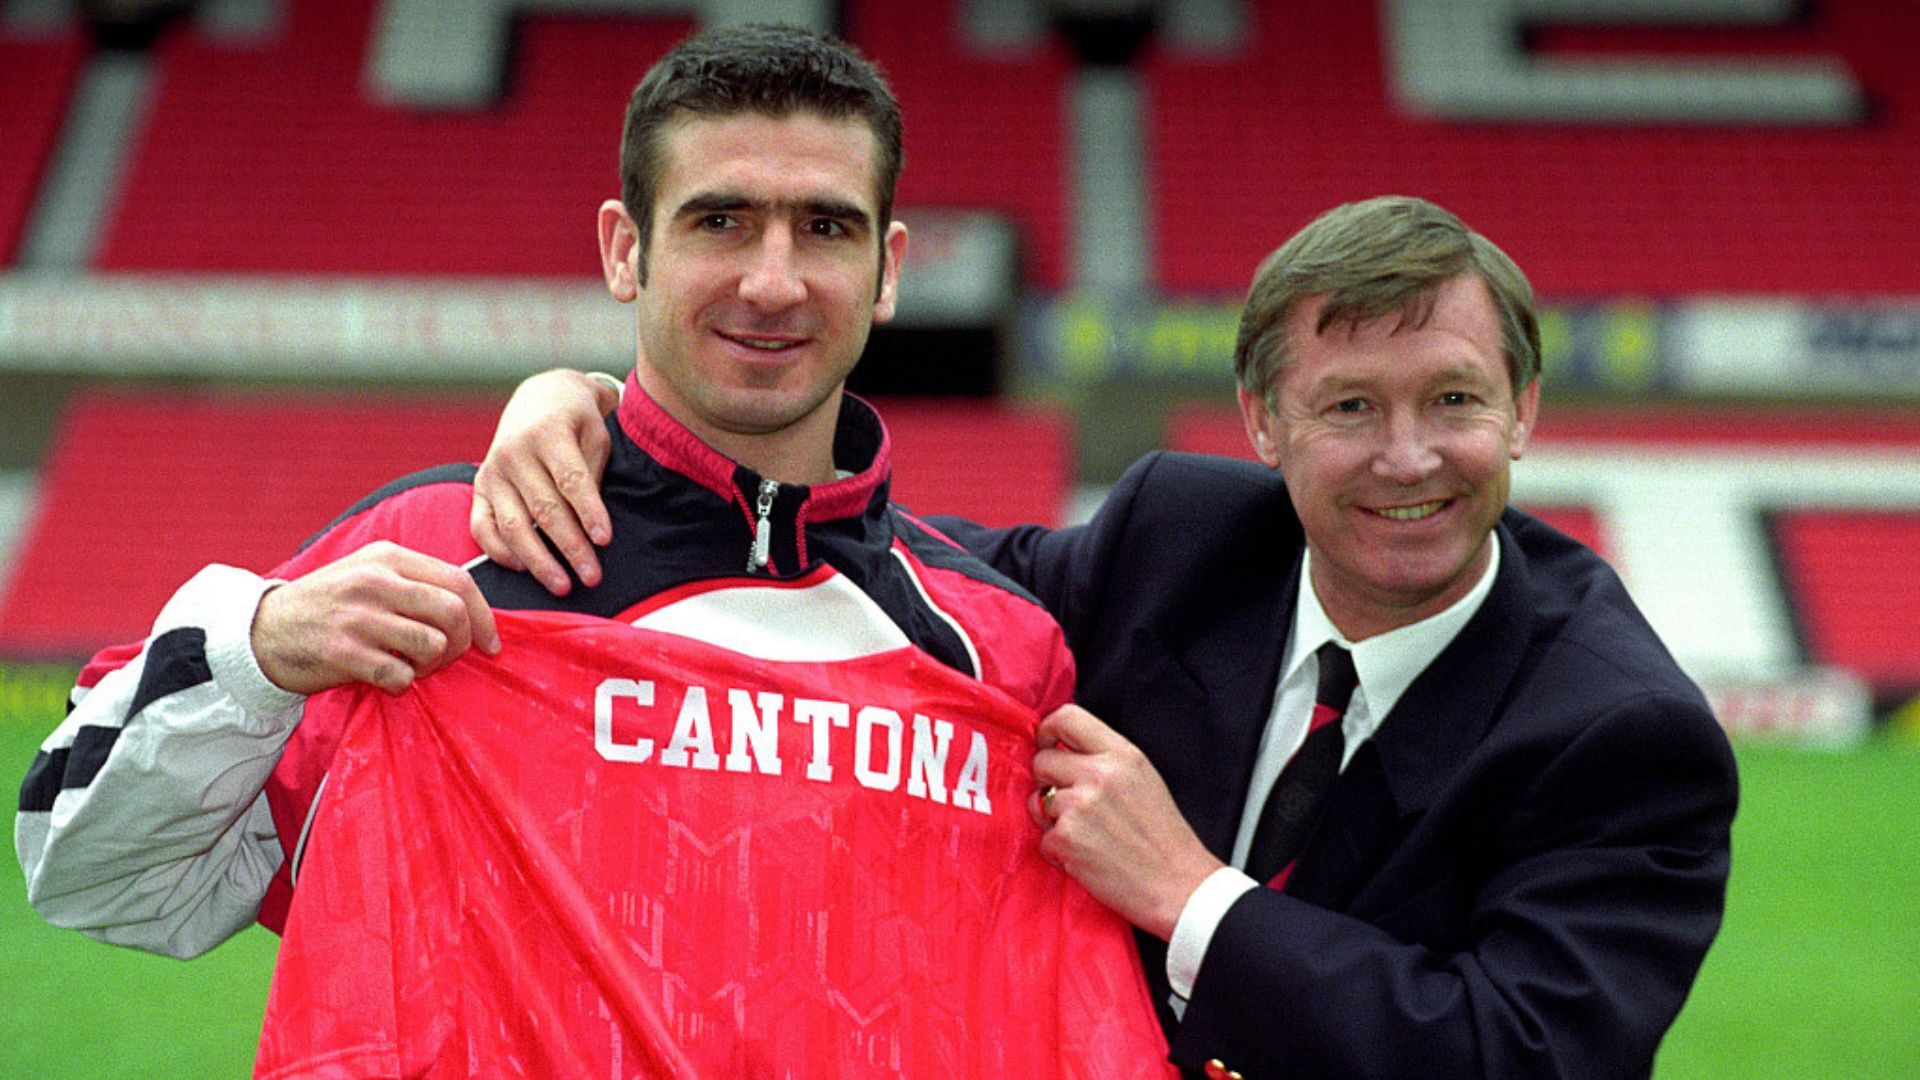 Cantona poses for a photo with manager Alex Ferguson on the day he joined Manchester United in November 1992. /CFP